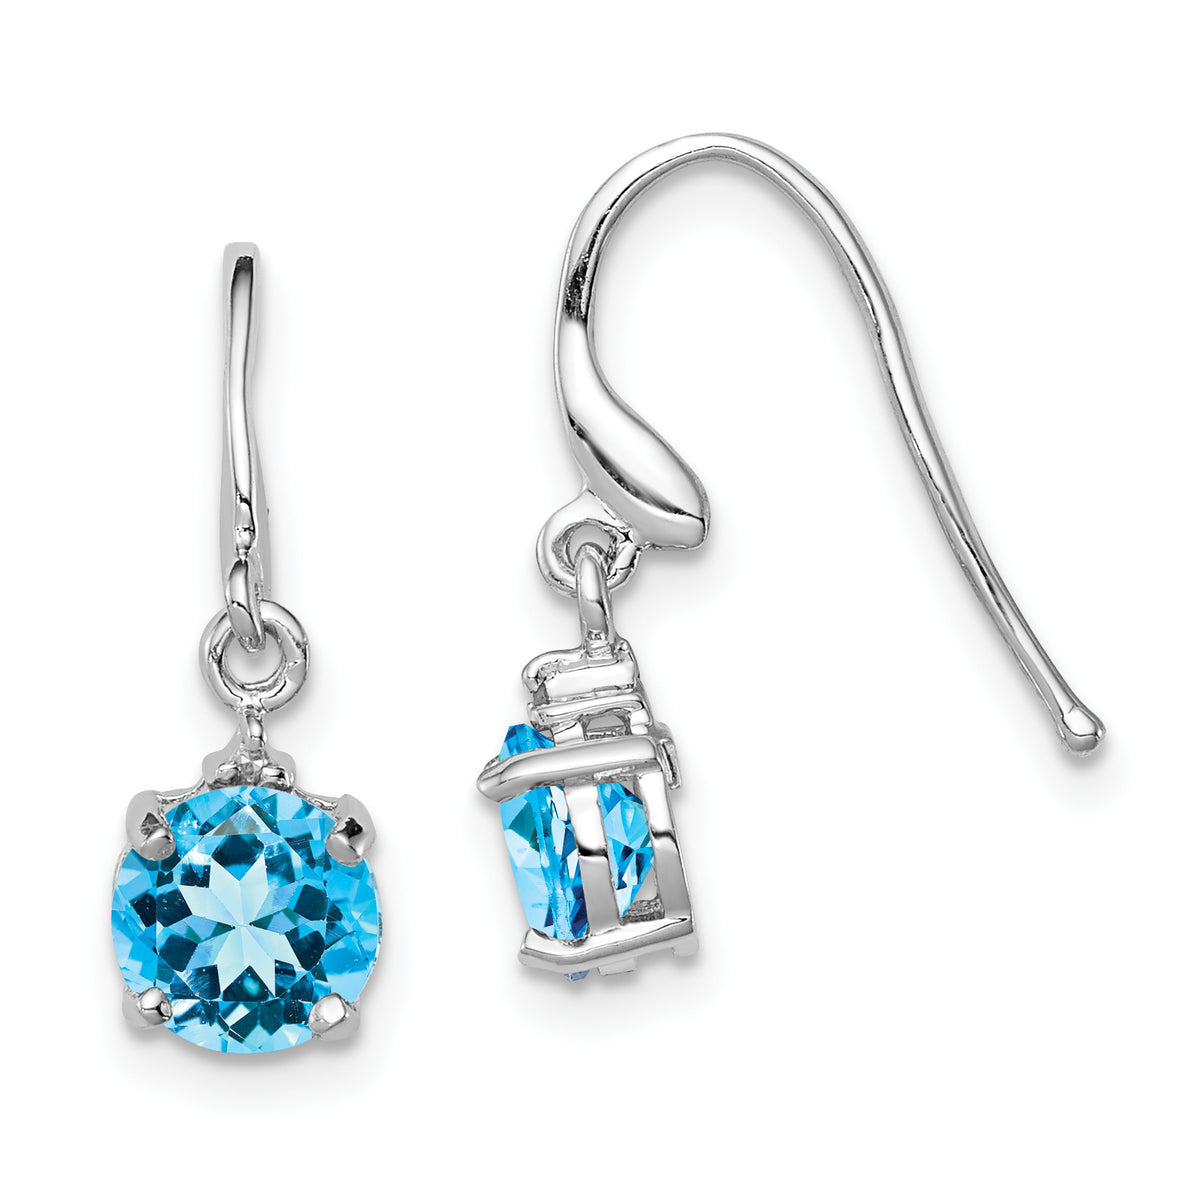 Sterling Silver Rhodium-plated Blue Topaz and Diamond Wire Earrings